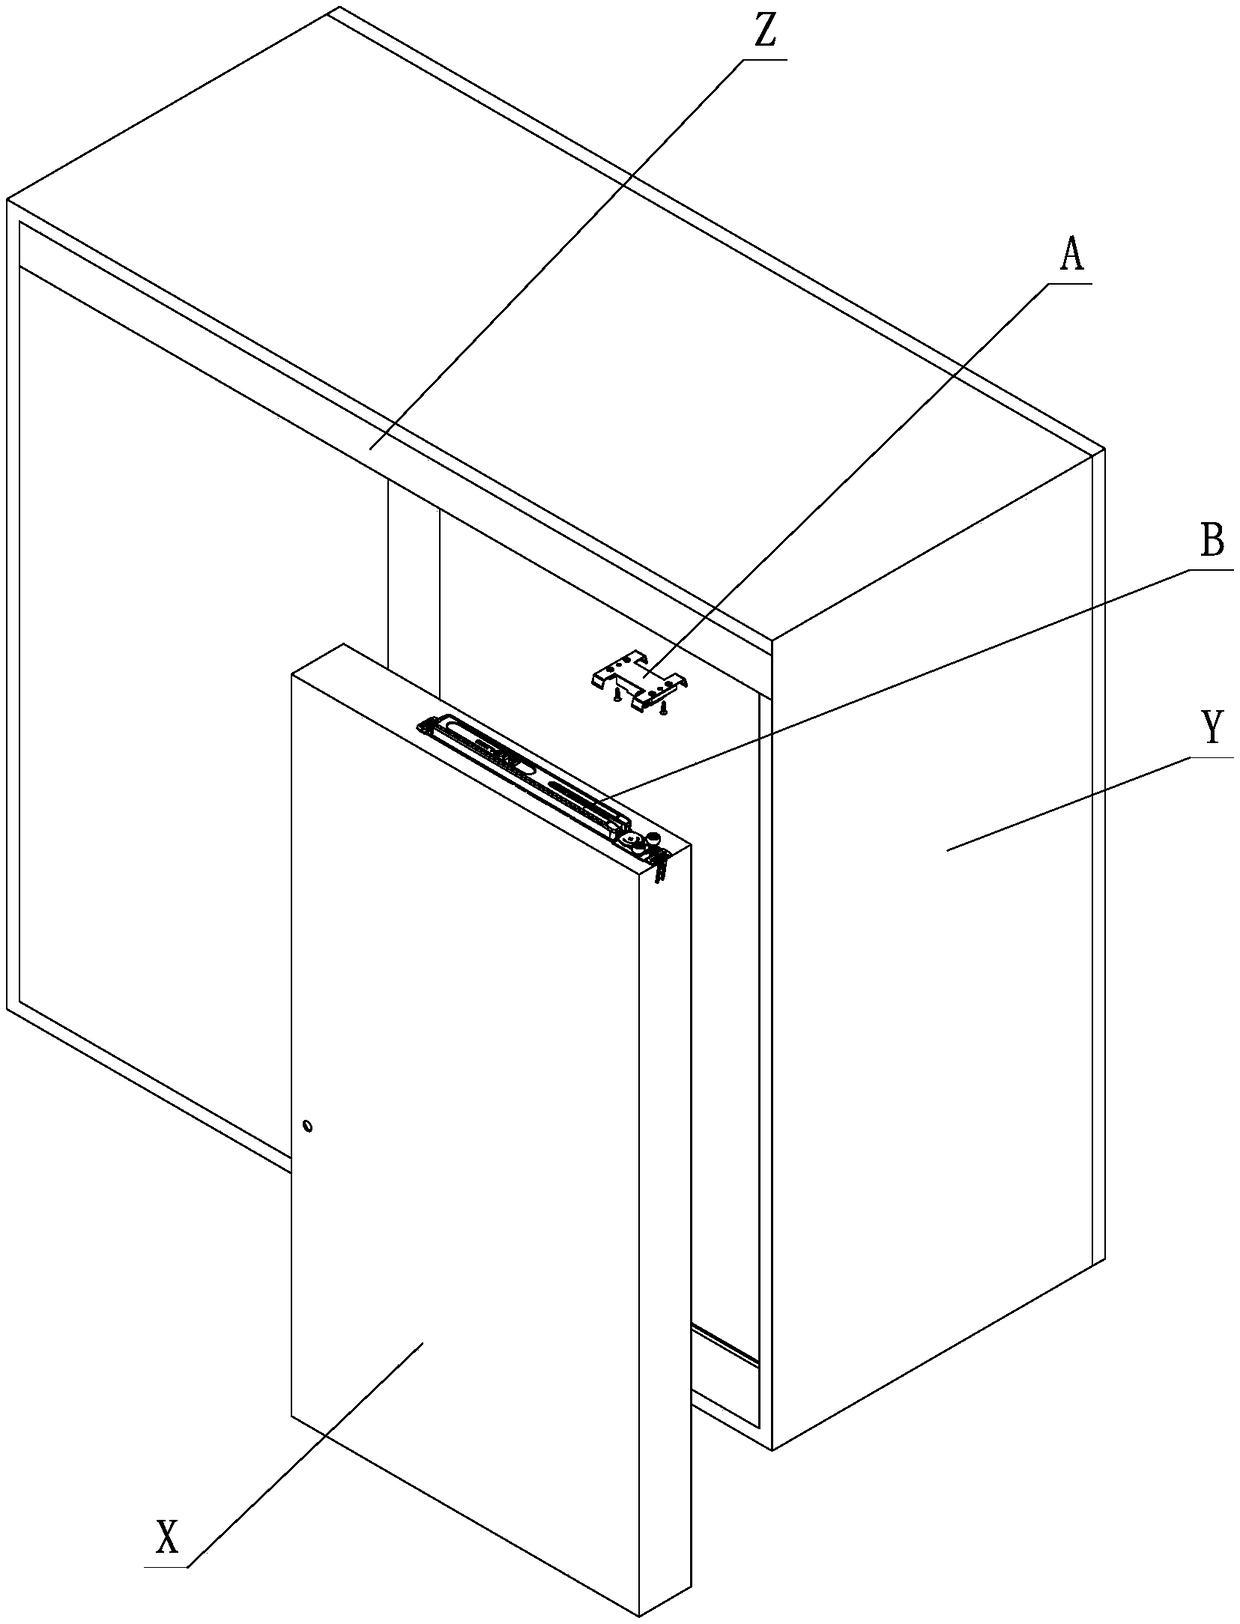 An adjustable toggle structure for furniture